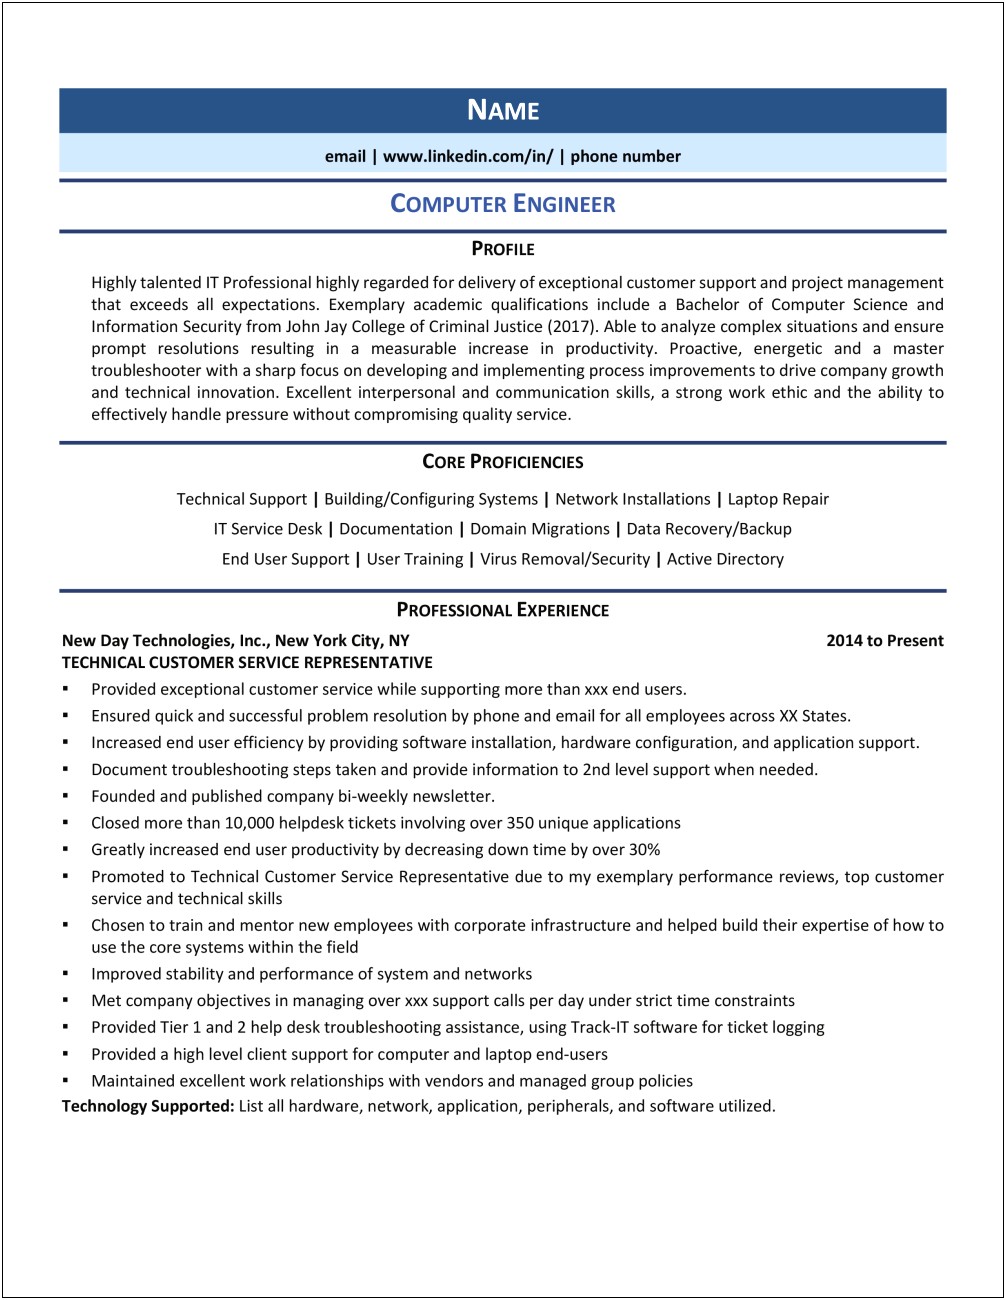 Computer Engineer Sample Resume For